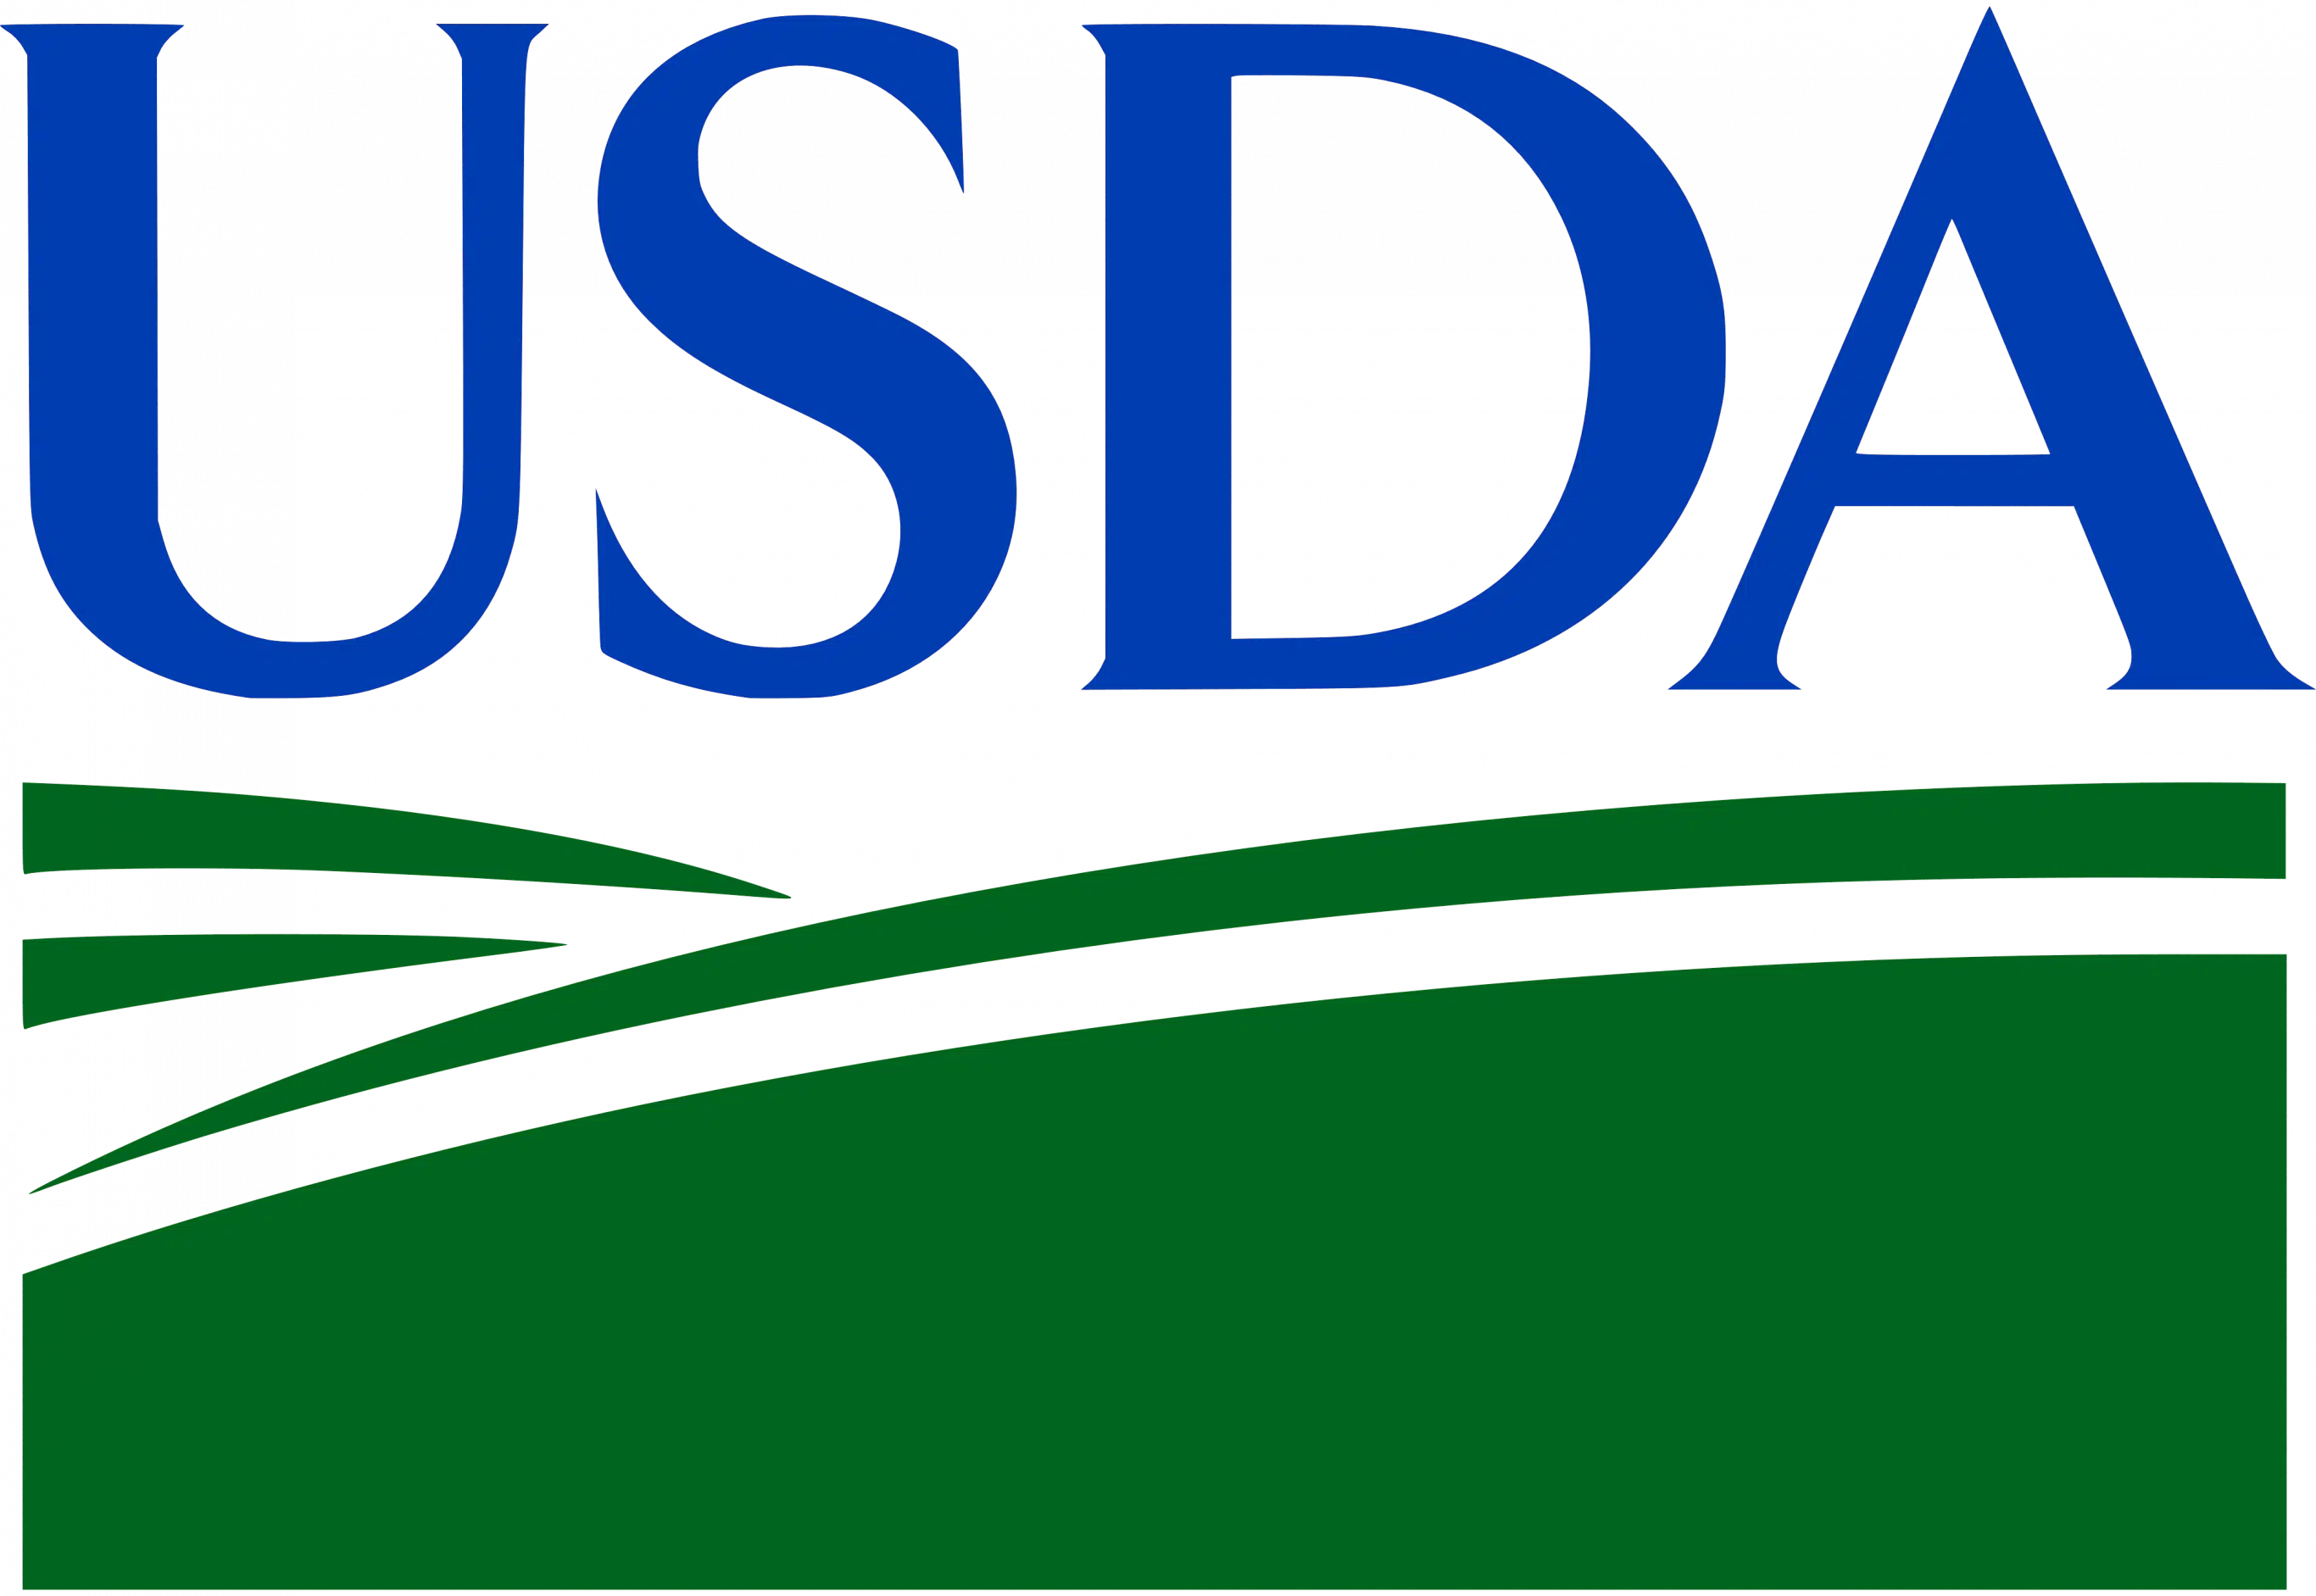 USDA Reminds Agricultural Producers of July 14 Deadline to Apply for Pandemic and Natural Disaster Revenue Loss Programs